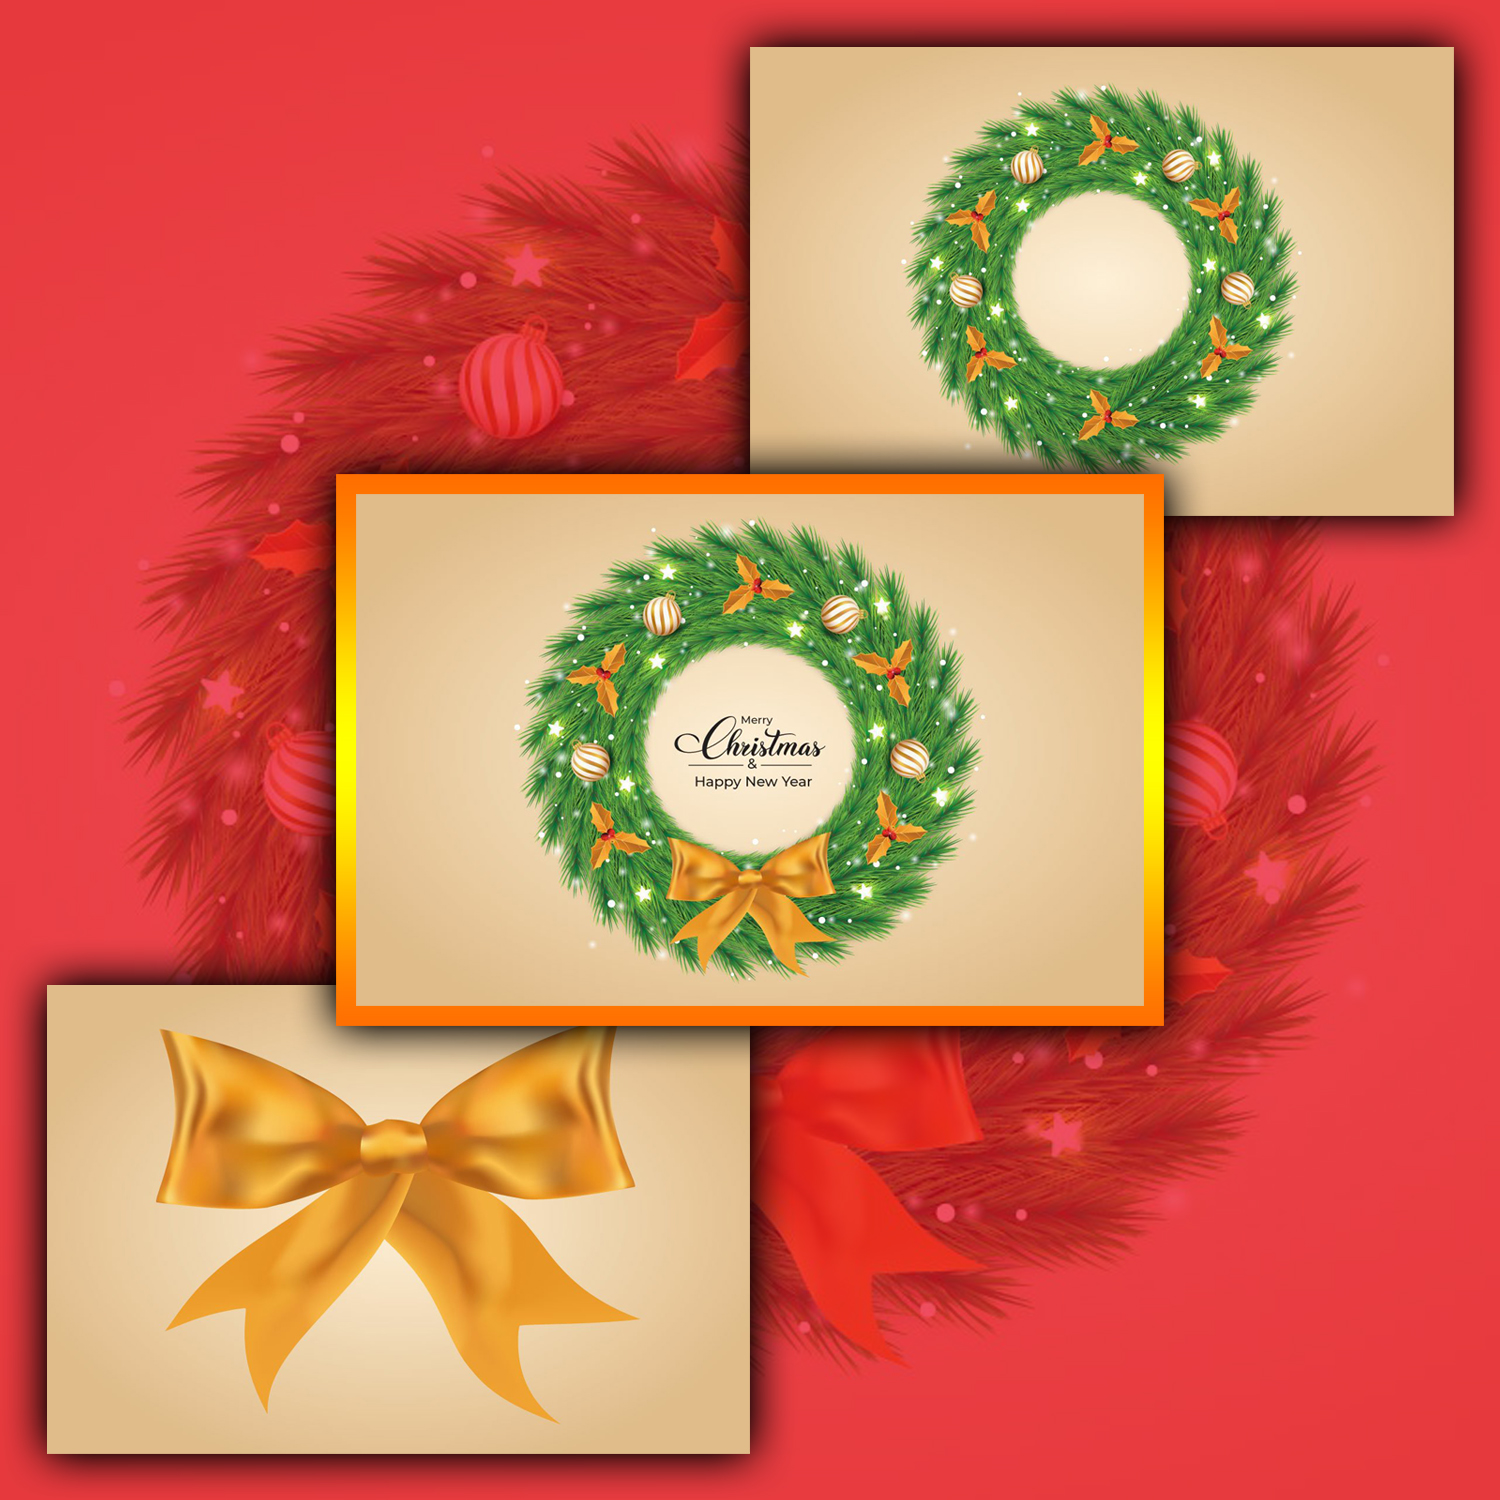 Images with christmas green wreath with golden balls.